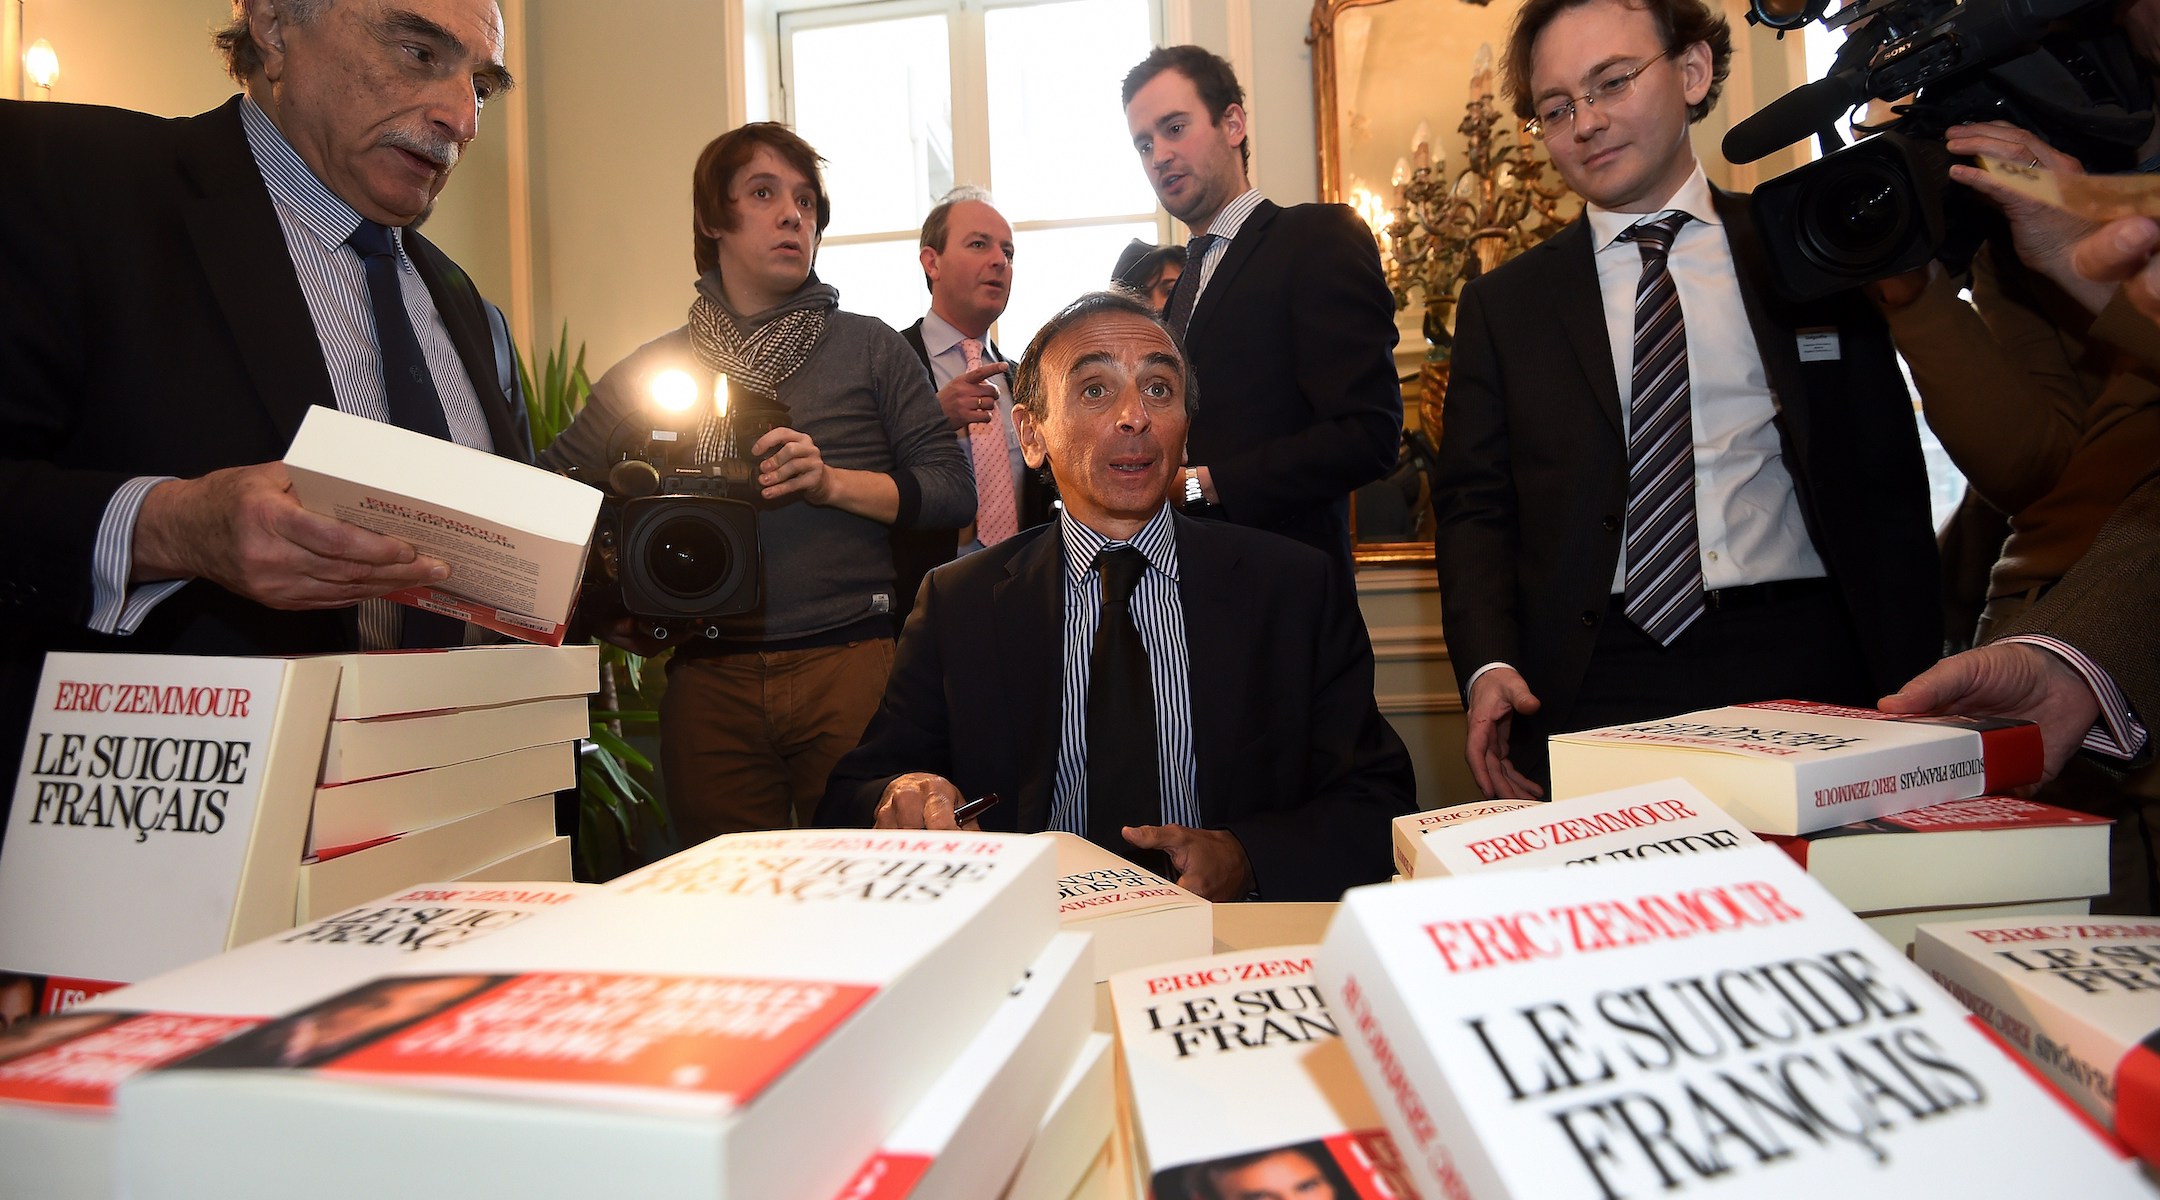 Eric Zemmour signs books